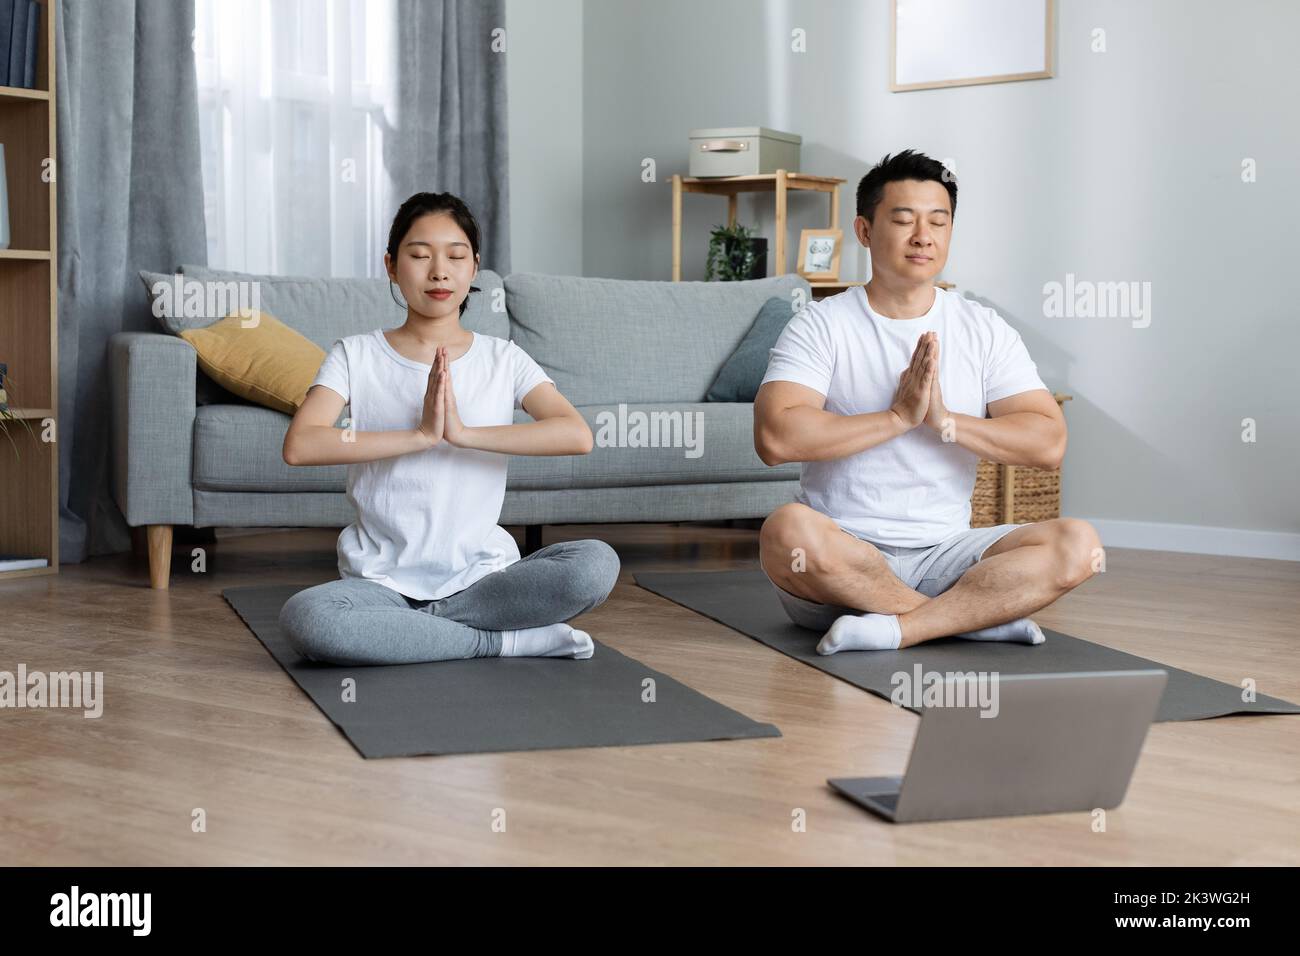 Relaxed korean couple meditating together at home Stock Photo